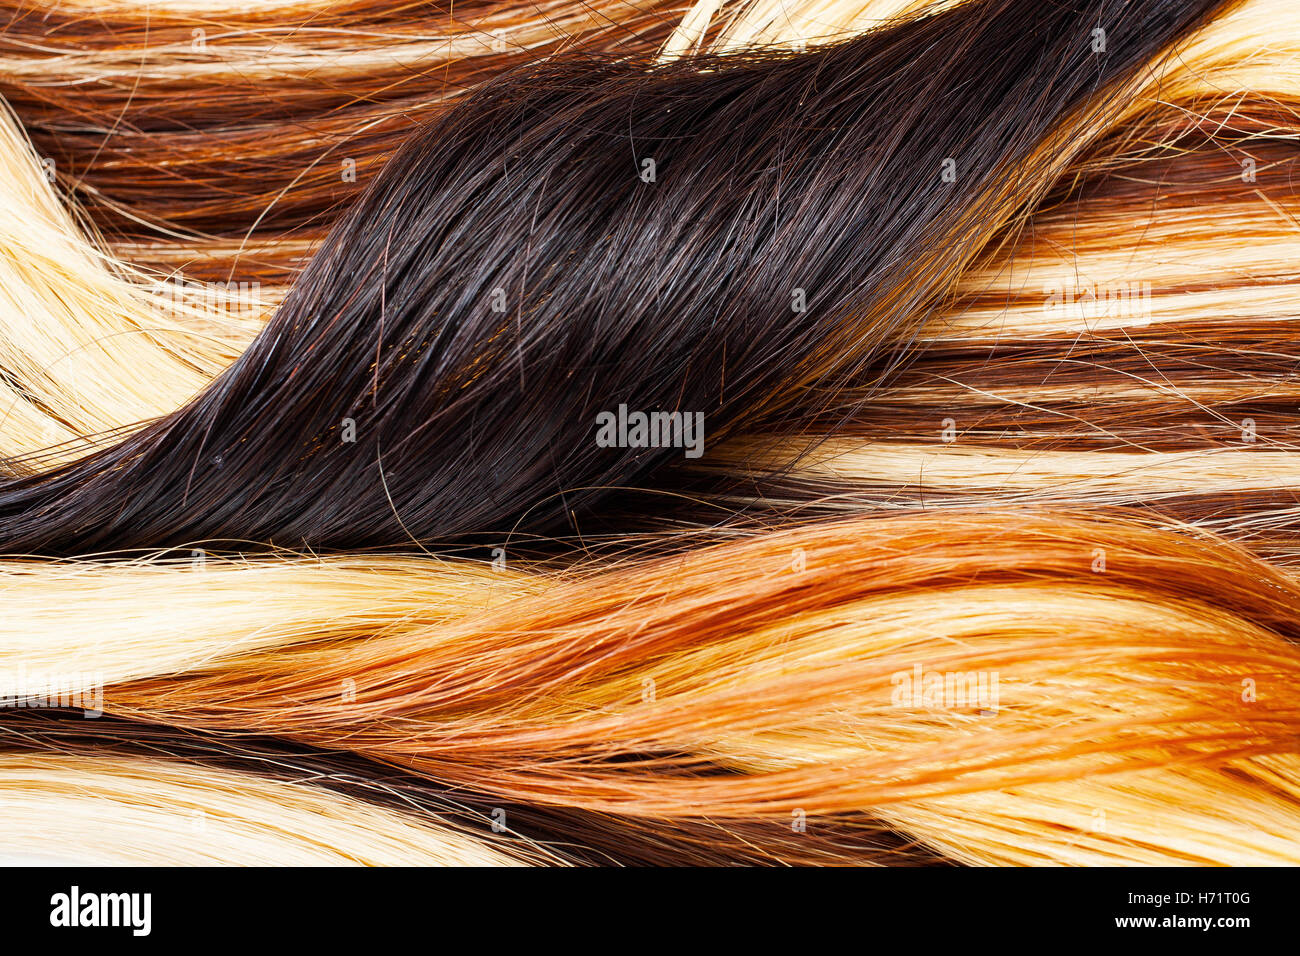 European human hair extension weft. Colored dry and silky hairs brown light blond red mixed ombre colors. Curly straight texture Stock Photo